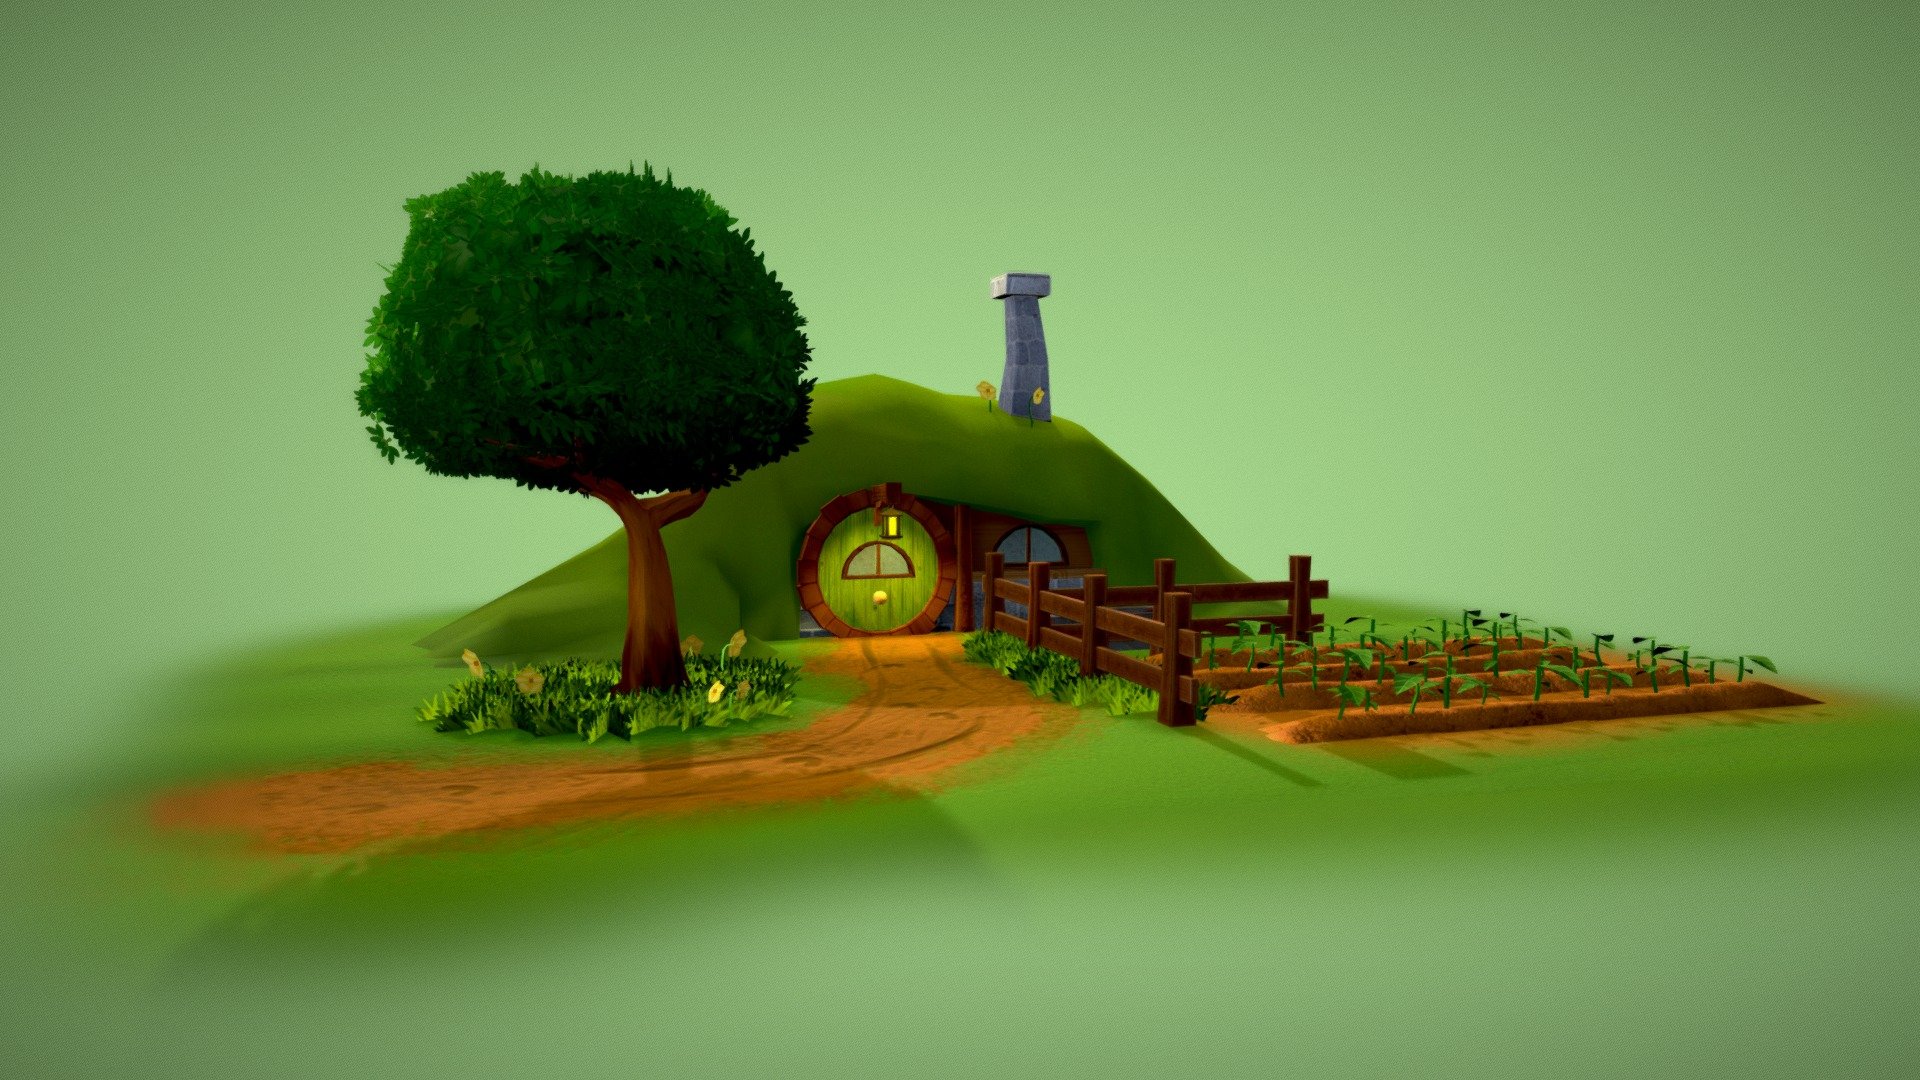 Made for a school assessment on environments and creating modular kits 3d model